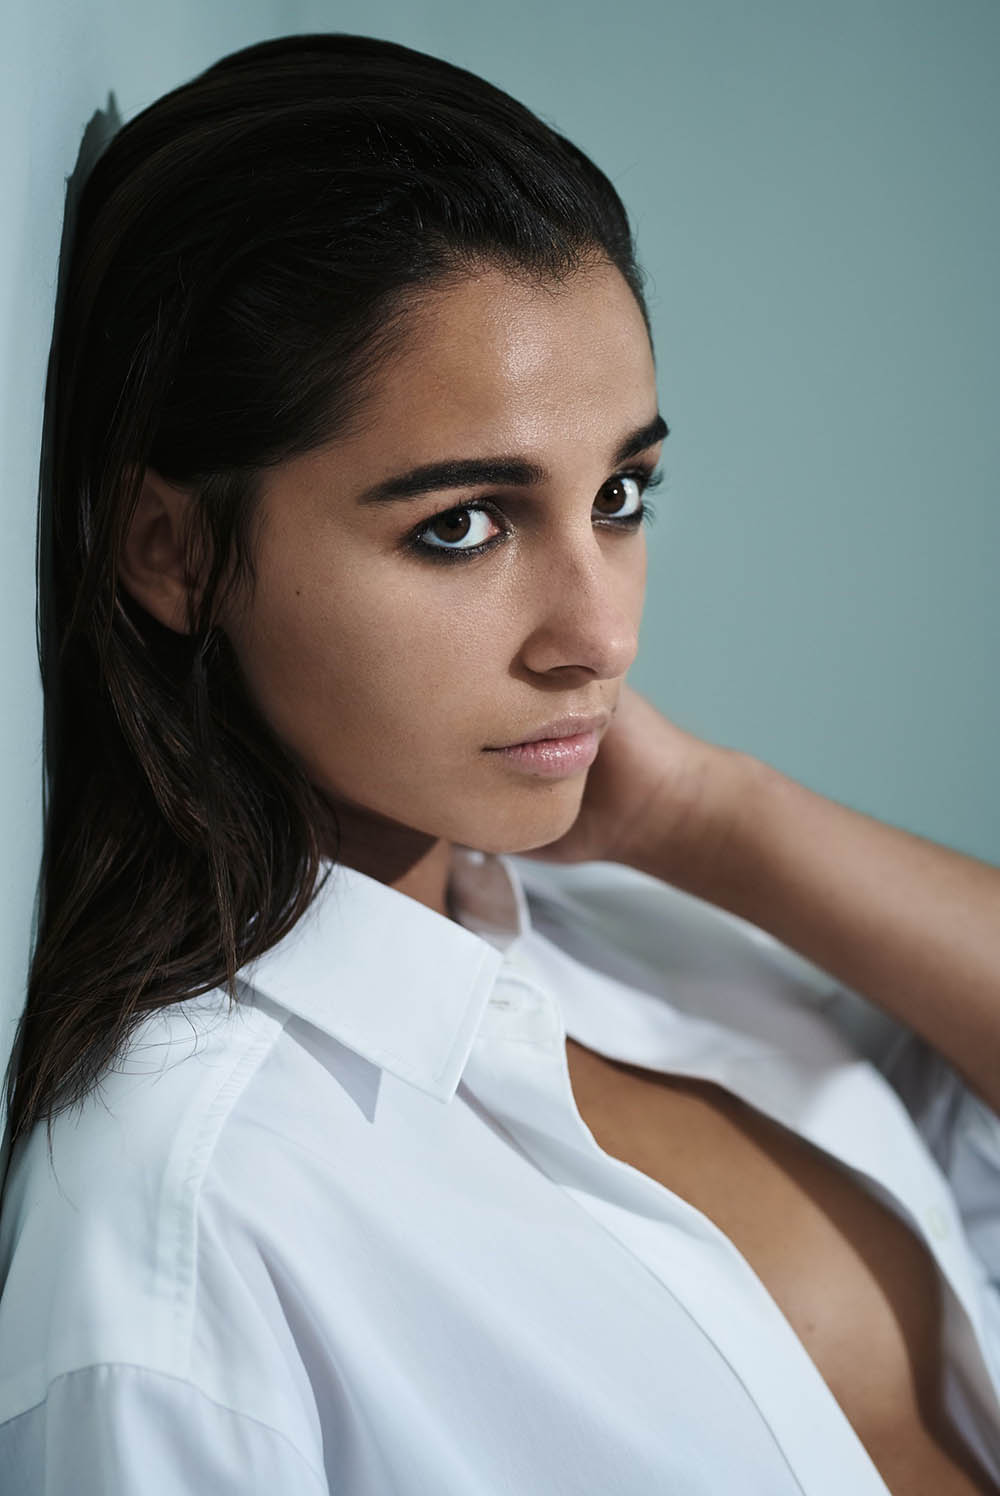 Naomi Scott covers AnOther Magazine Fall Winter 2019 by Collier Schorr